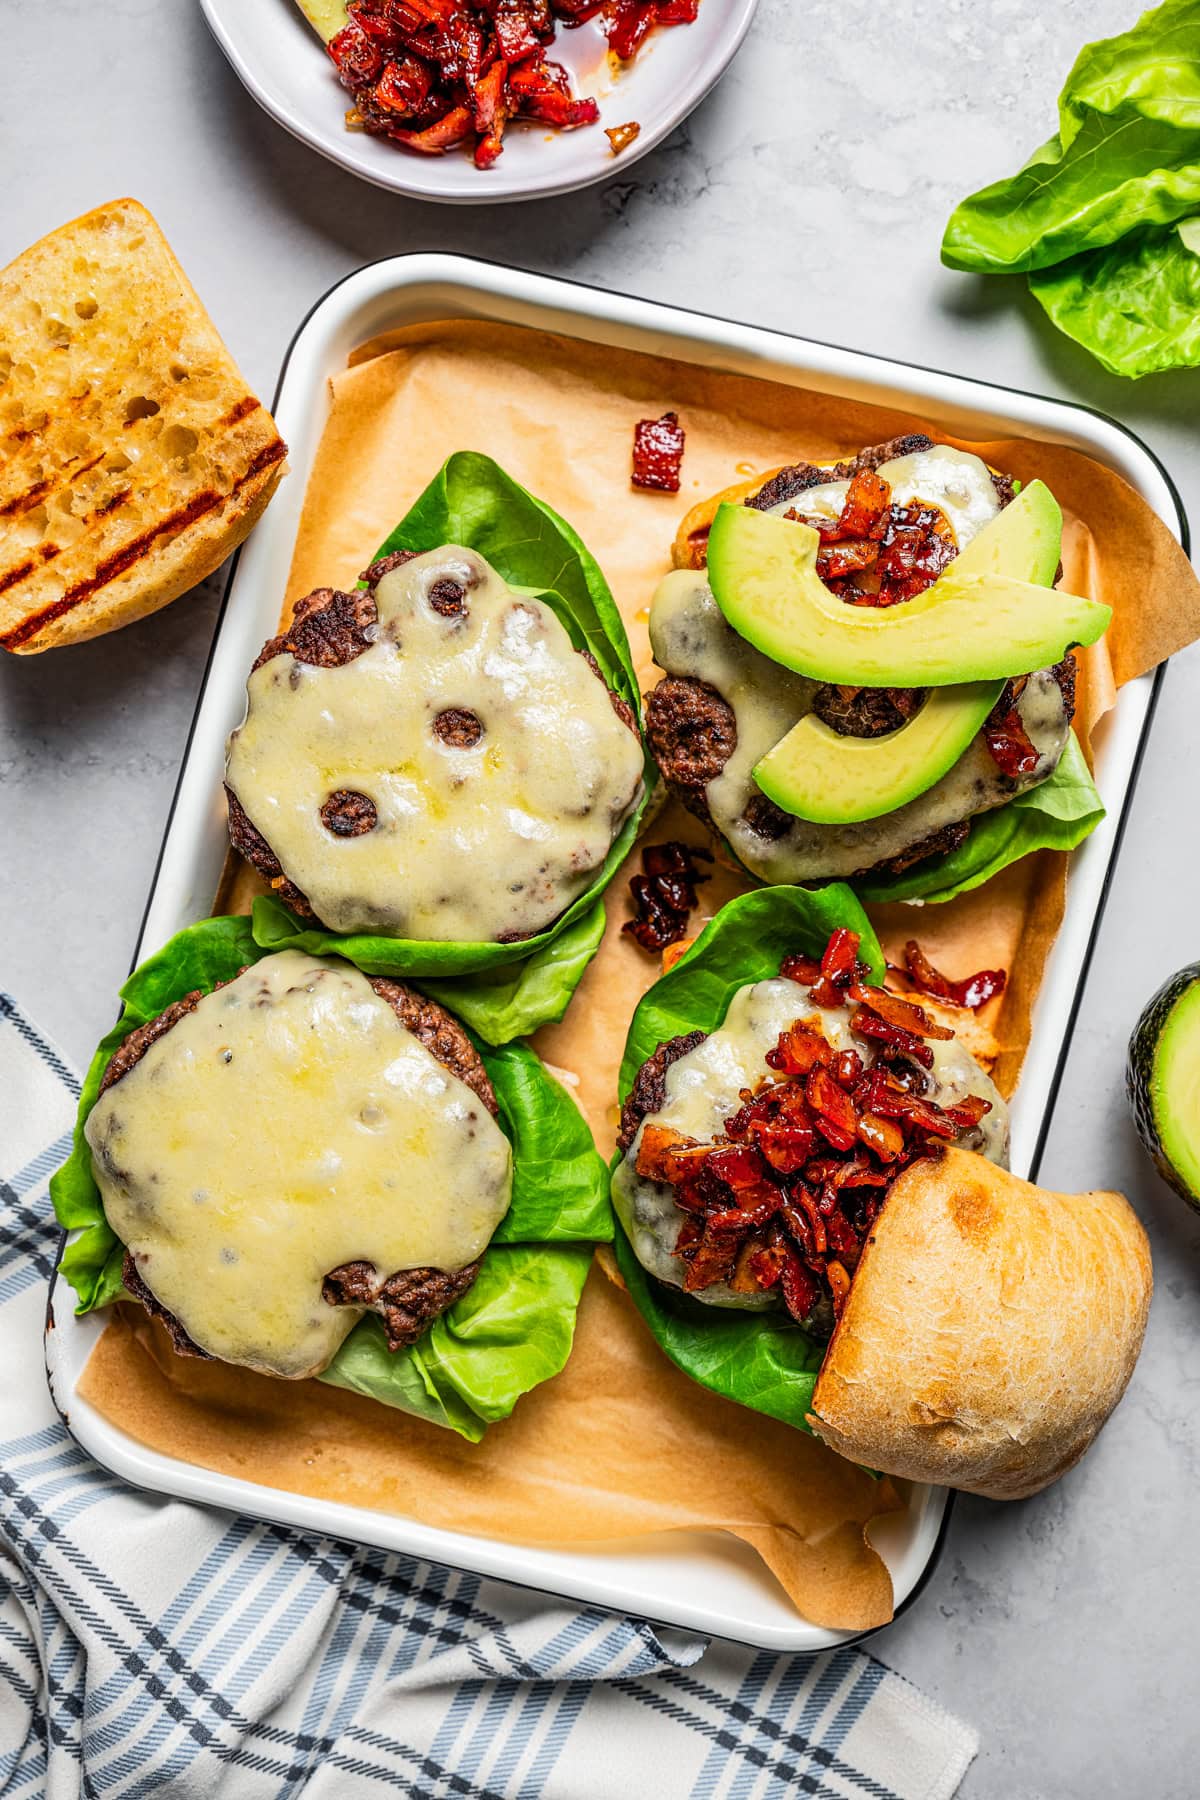 Overhead view of partially assembled California burgers topped with lettuce, cheese, avocado slices, and bacon jam on a lined metal tray, surrounded by toppings.